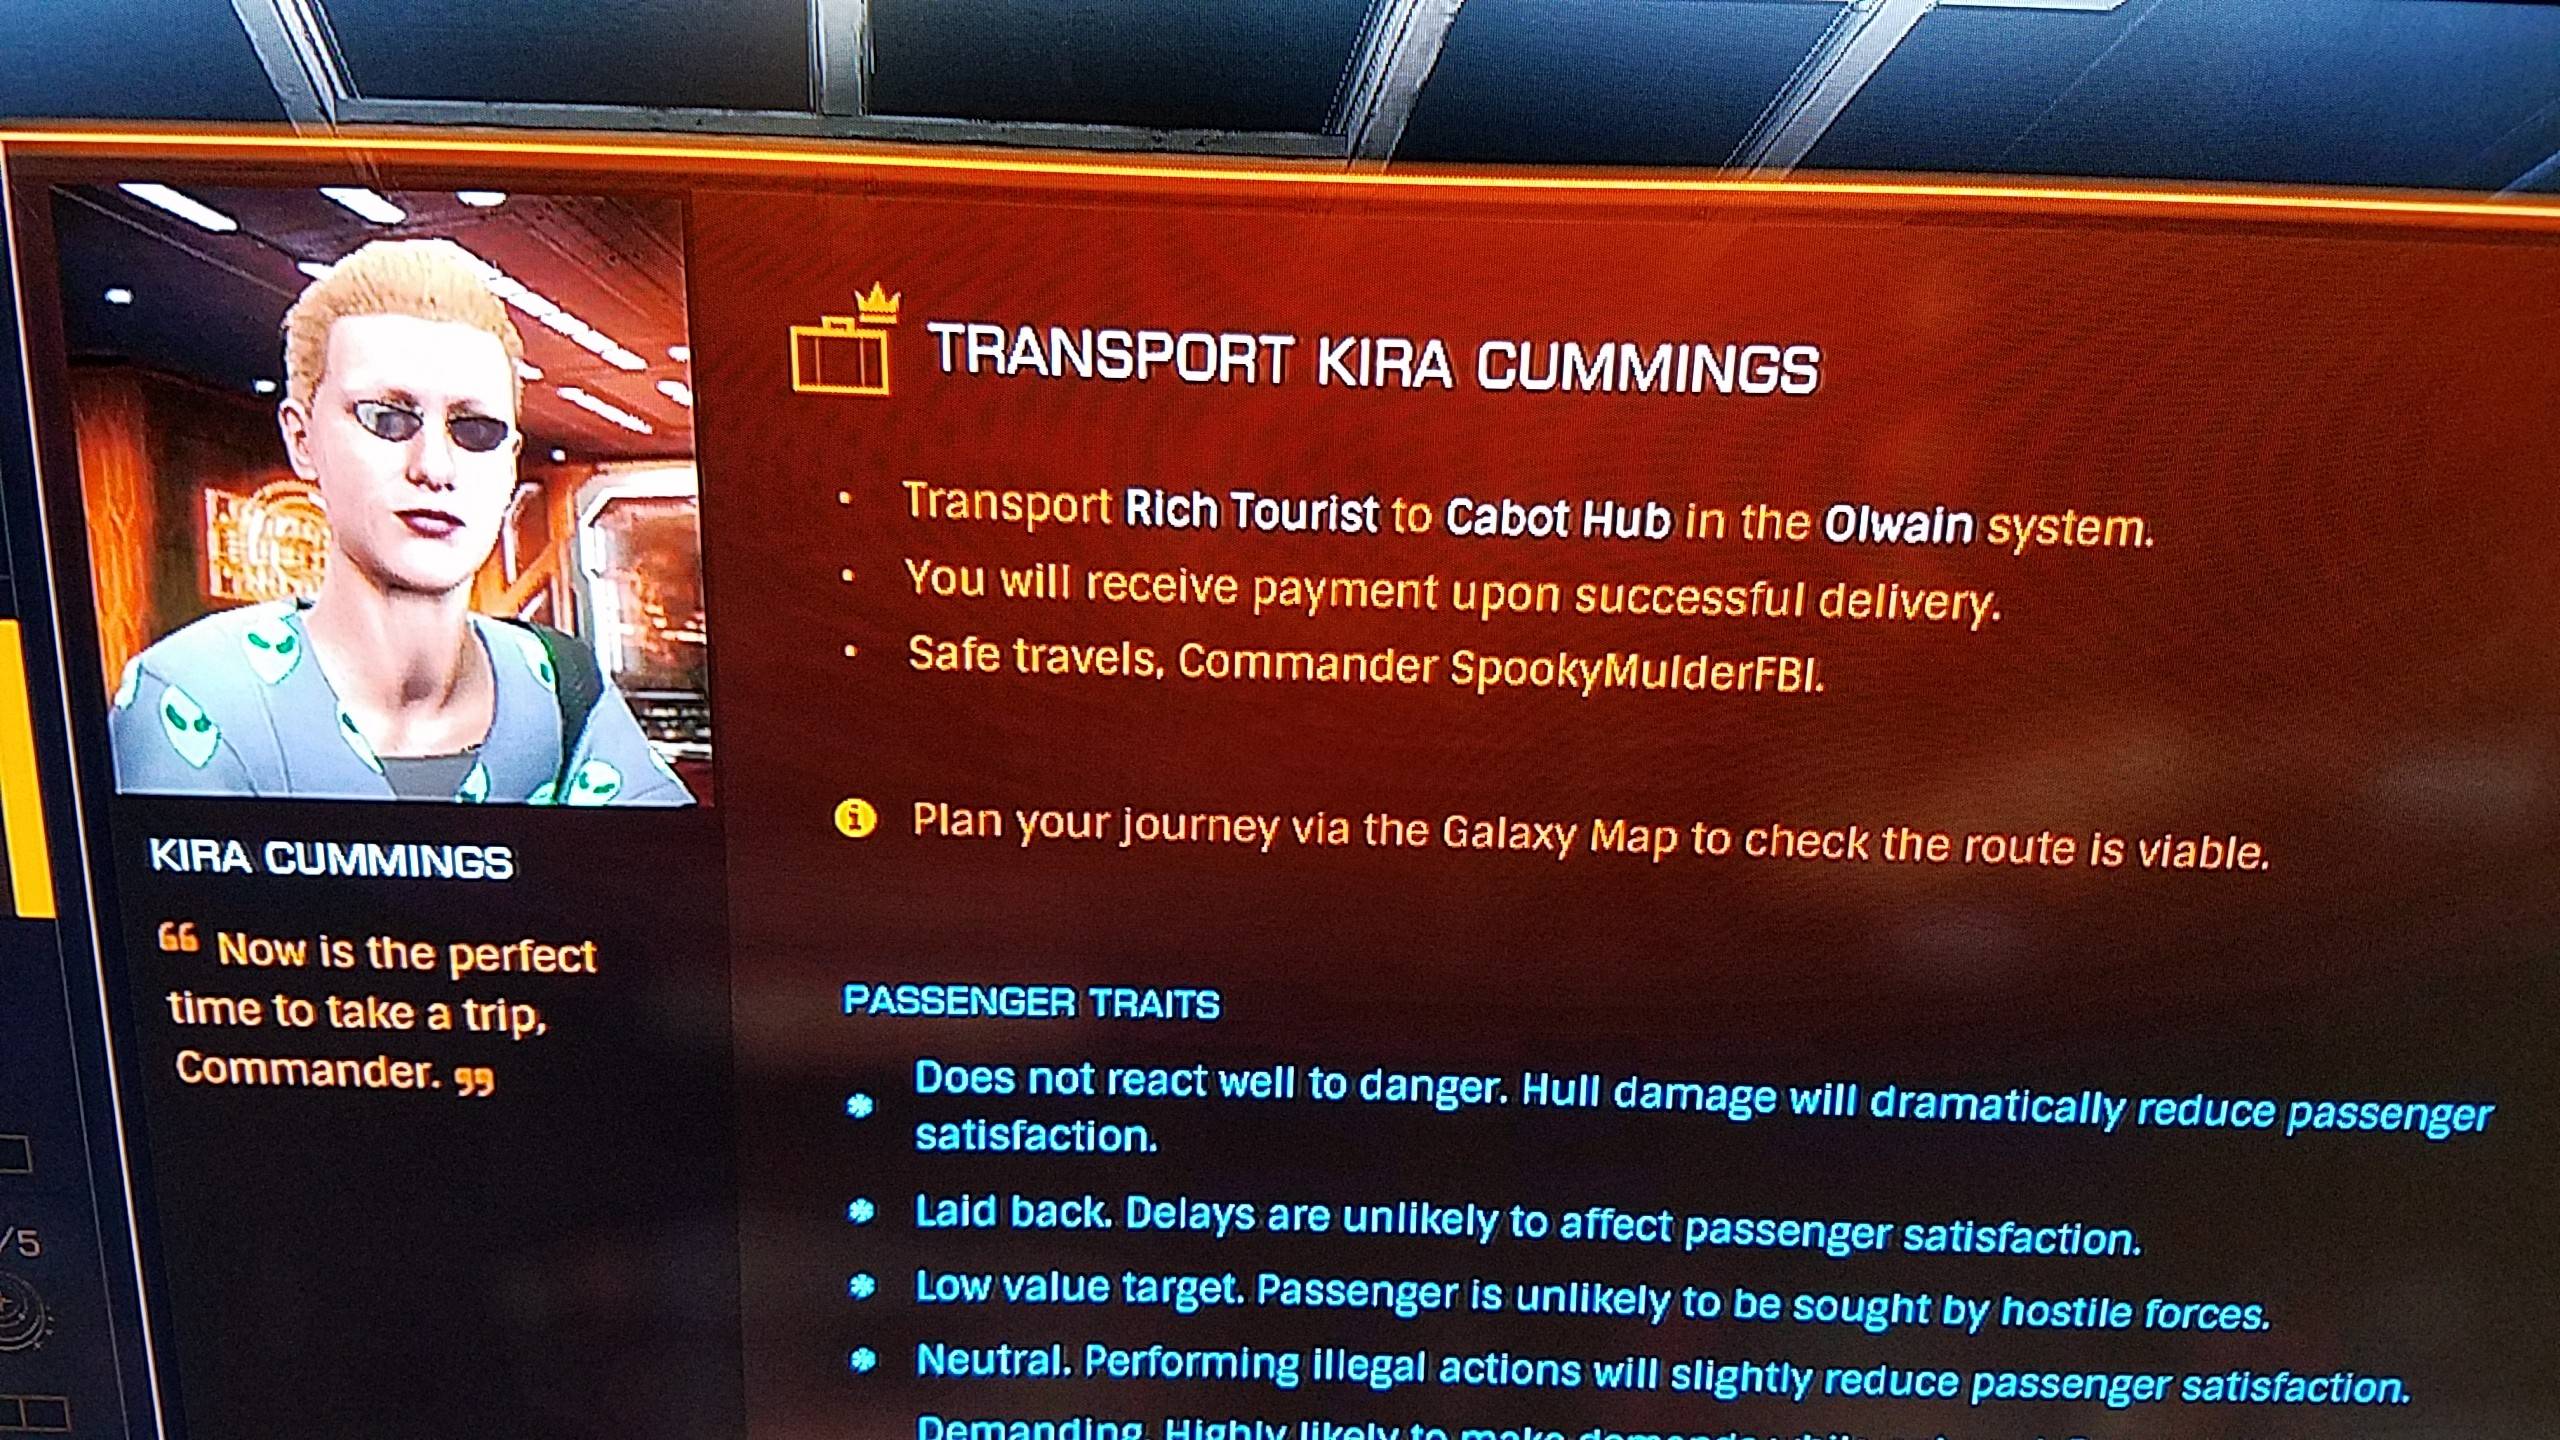 will passagner satisfaction go back up after hull dmg in elite dangerous?